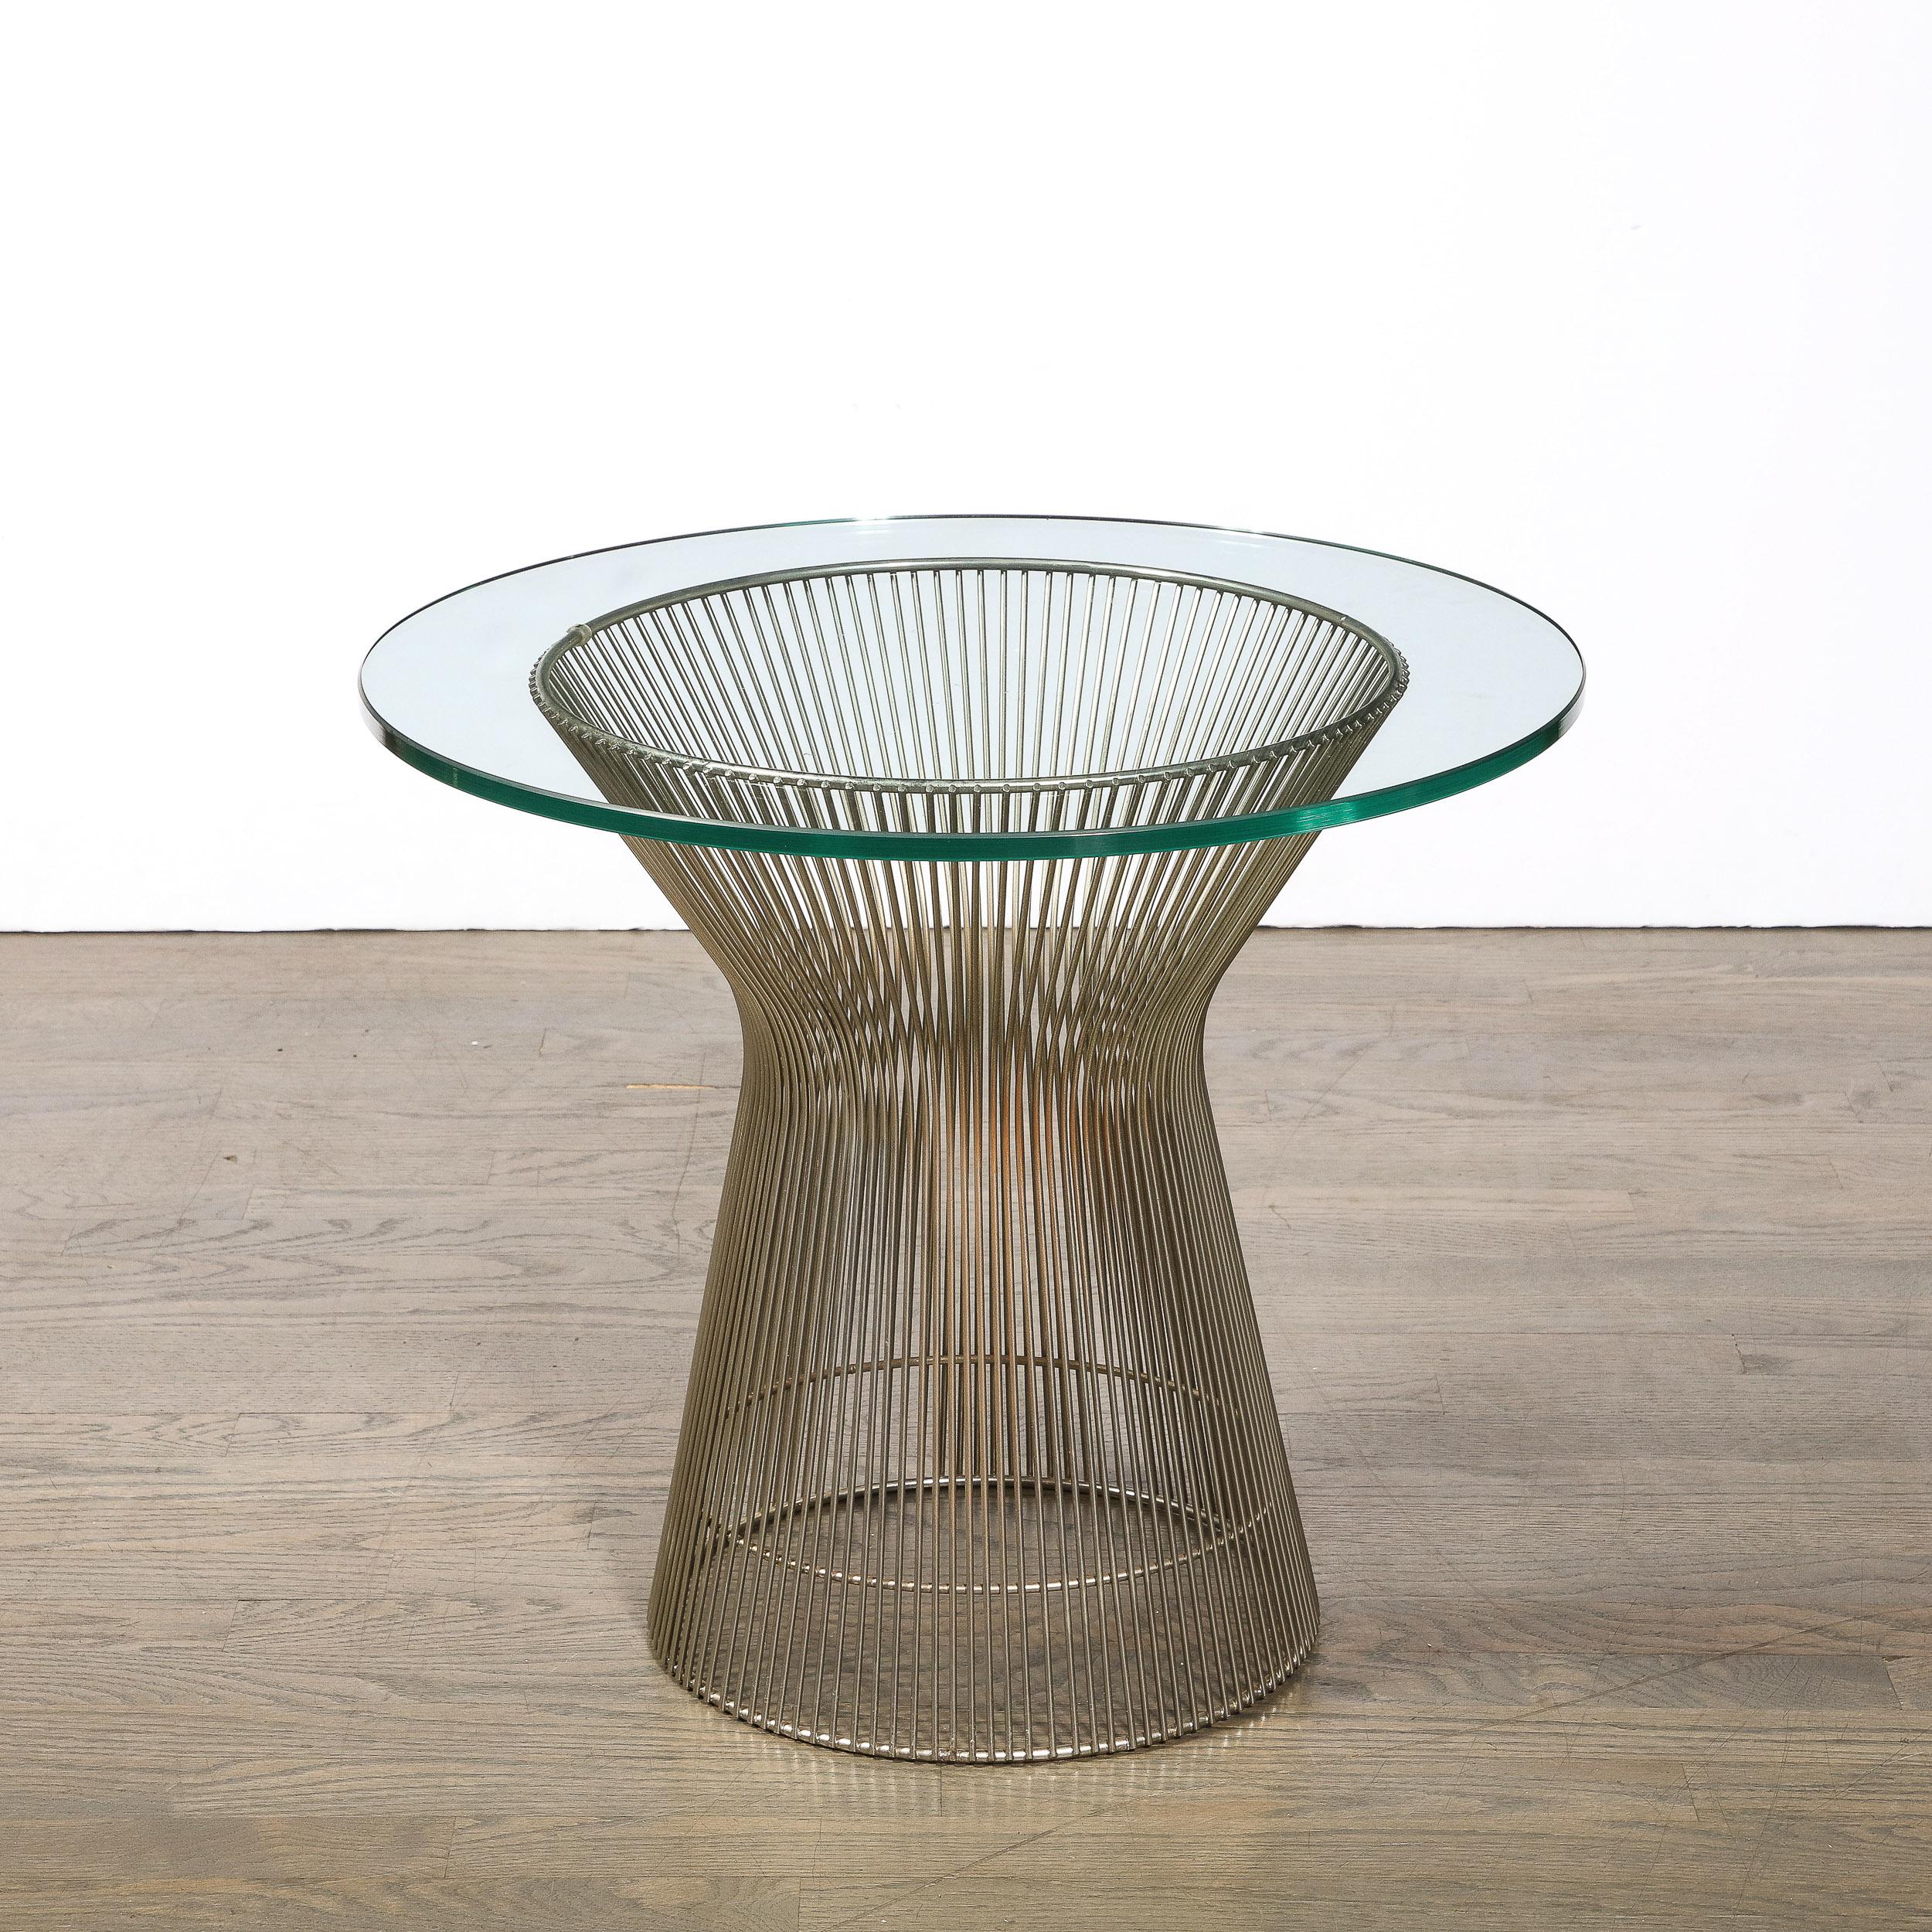 Late 20th Century Pair of Mid-Century Modernist Polished Nickel Side Tables by Warren Platner For Sale